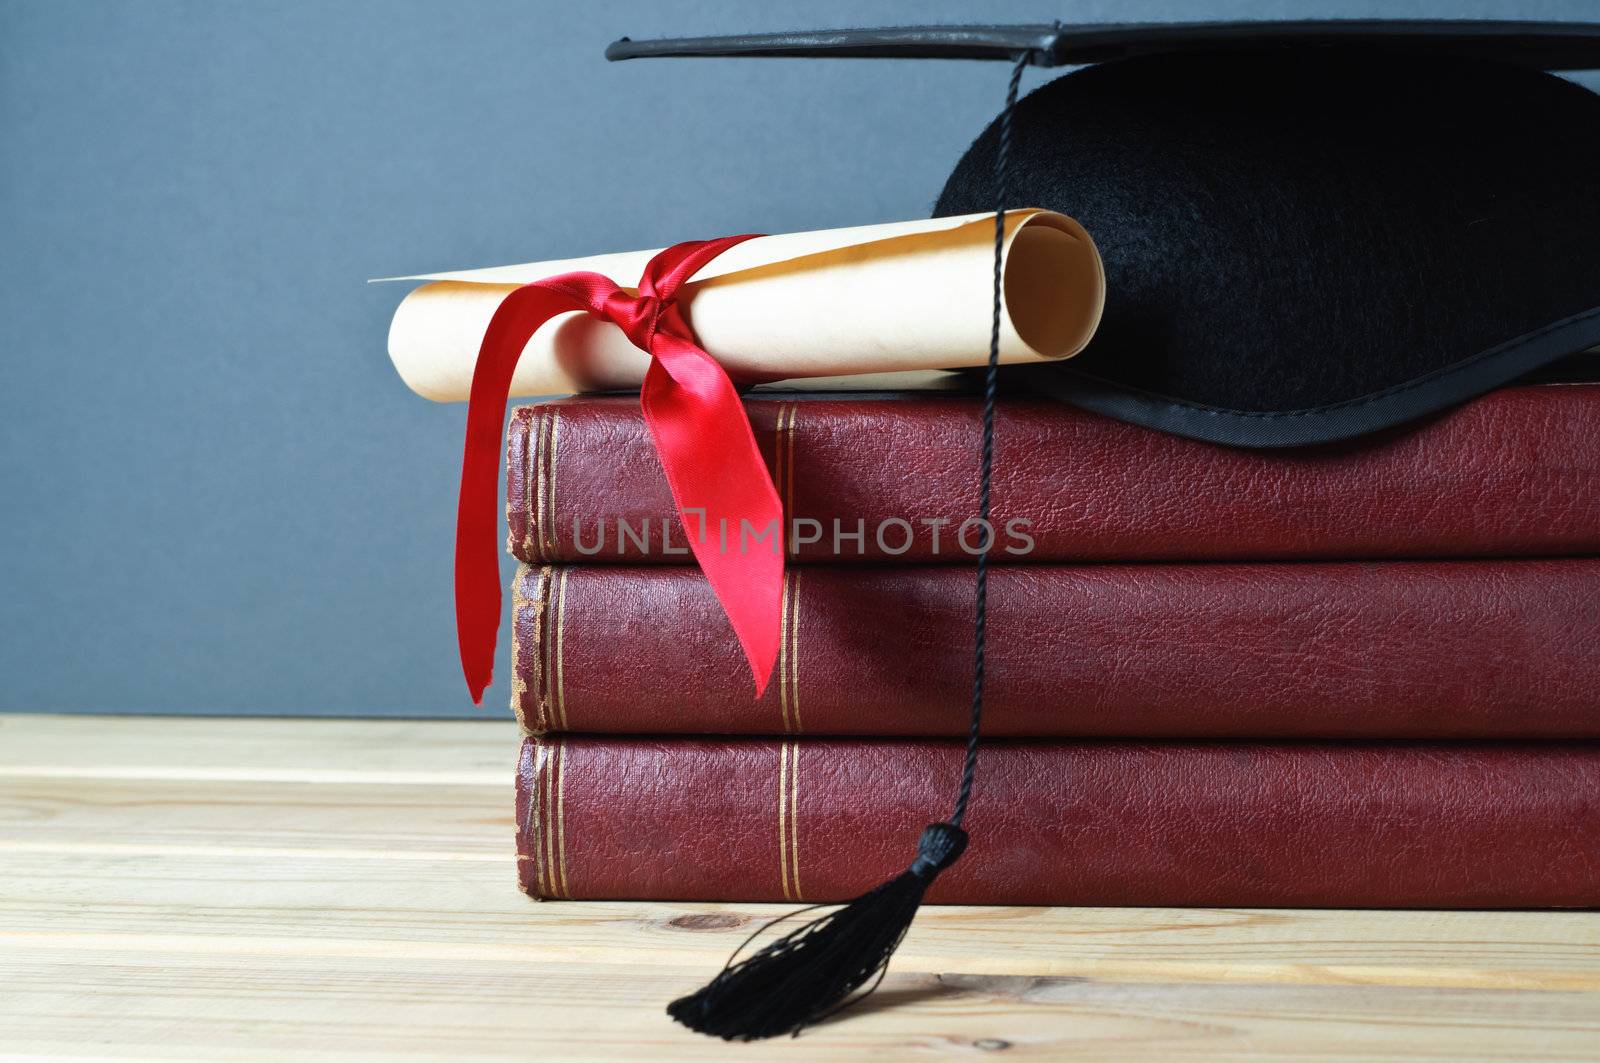 Graduation mortarboard and scroll tied with red ribbon on top of a stack of old, worn books on a light wood table.  Grey background.  